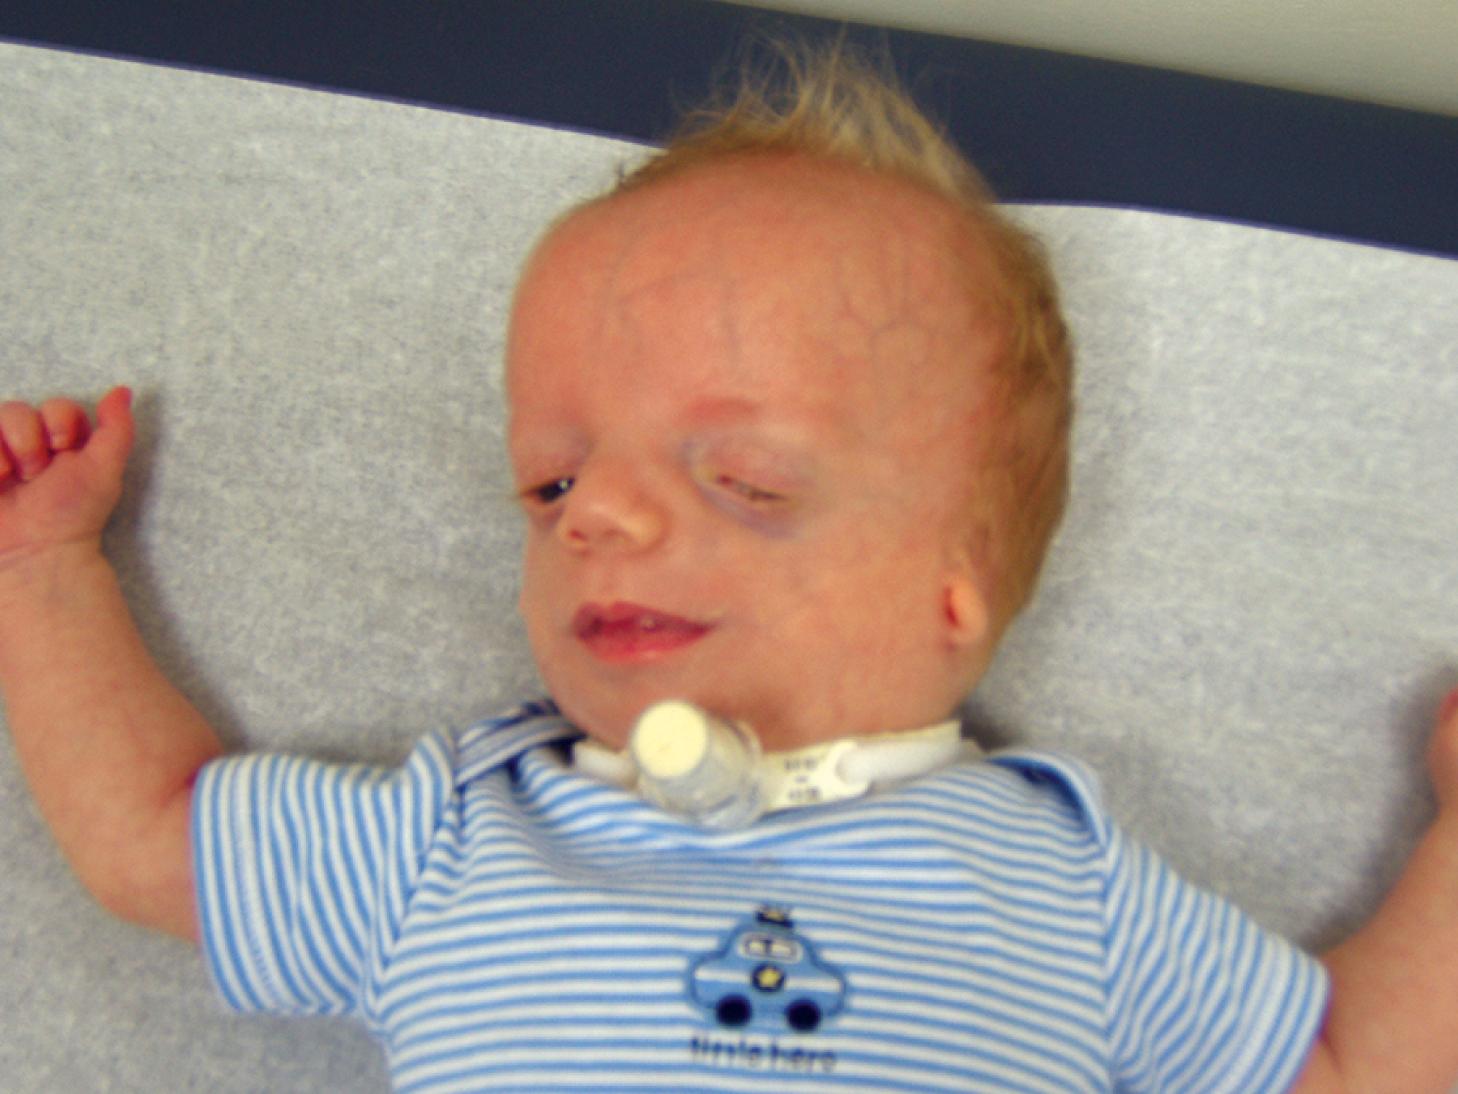 Fig. 1.31, A 4-month-old male with classic features of Treacher Collins syndrome. Note the down-slanted palpebral fissures, malar hypoplasia, malformed auricle, and mandibular hypoplasia. The pathogenic variant was identified as a single sequence variation (c.2897insC) in the TCOF1 gene that introduces a premature stop codon.